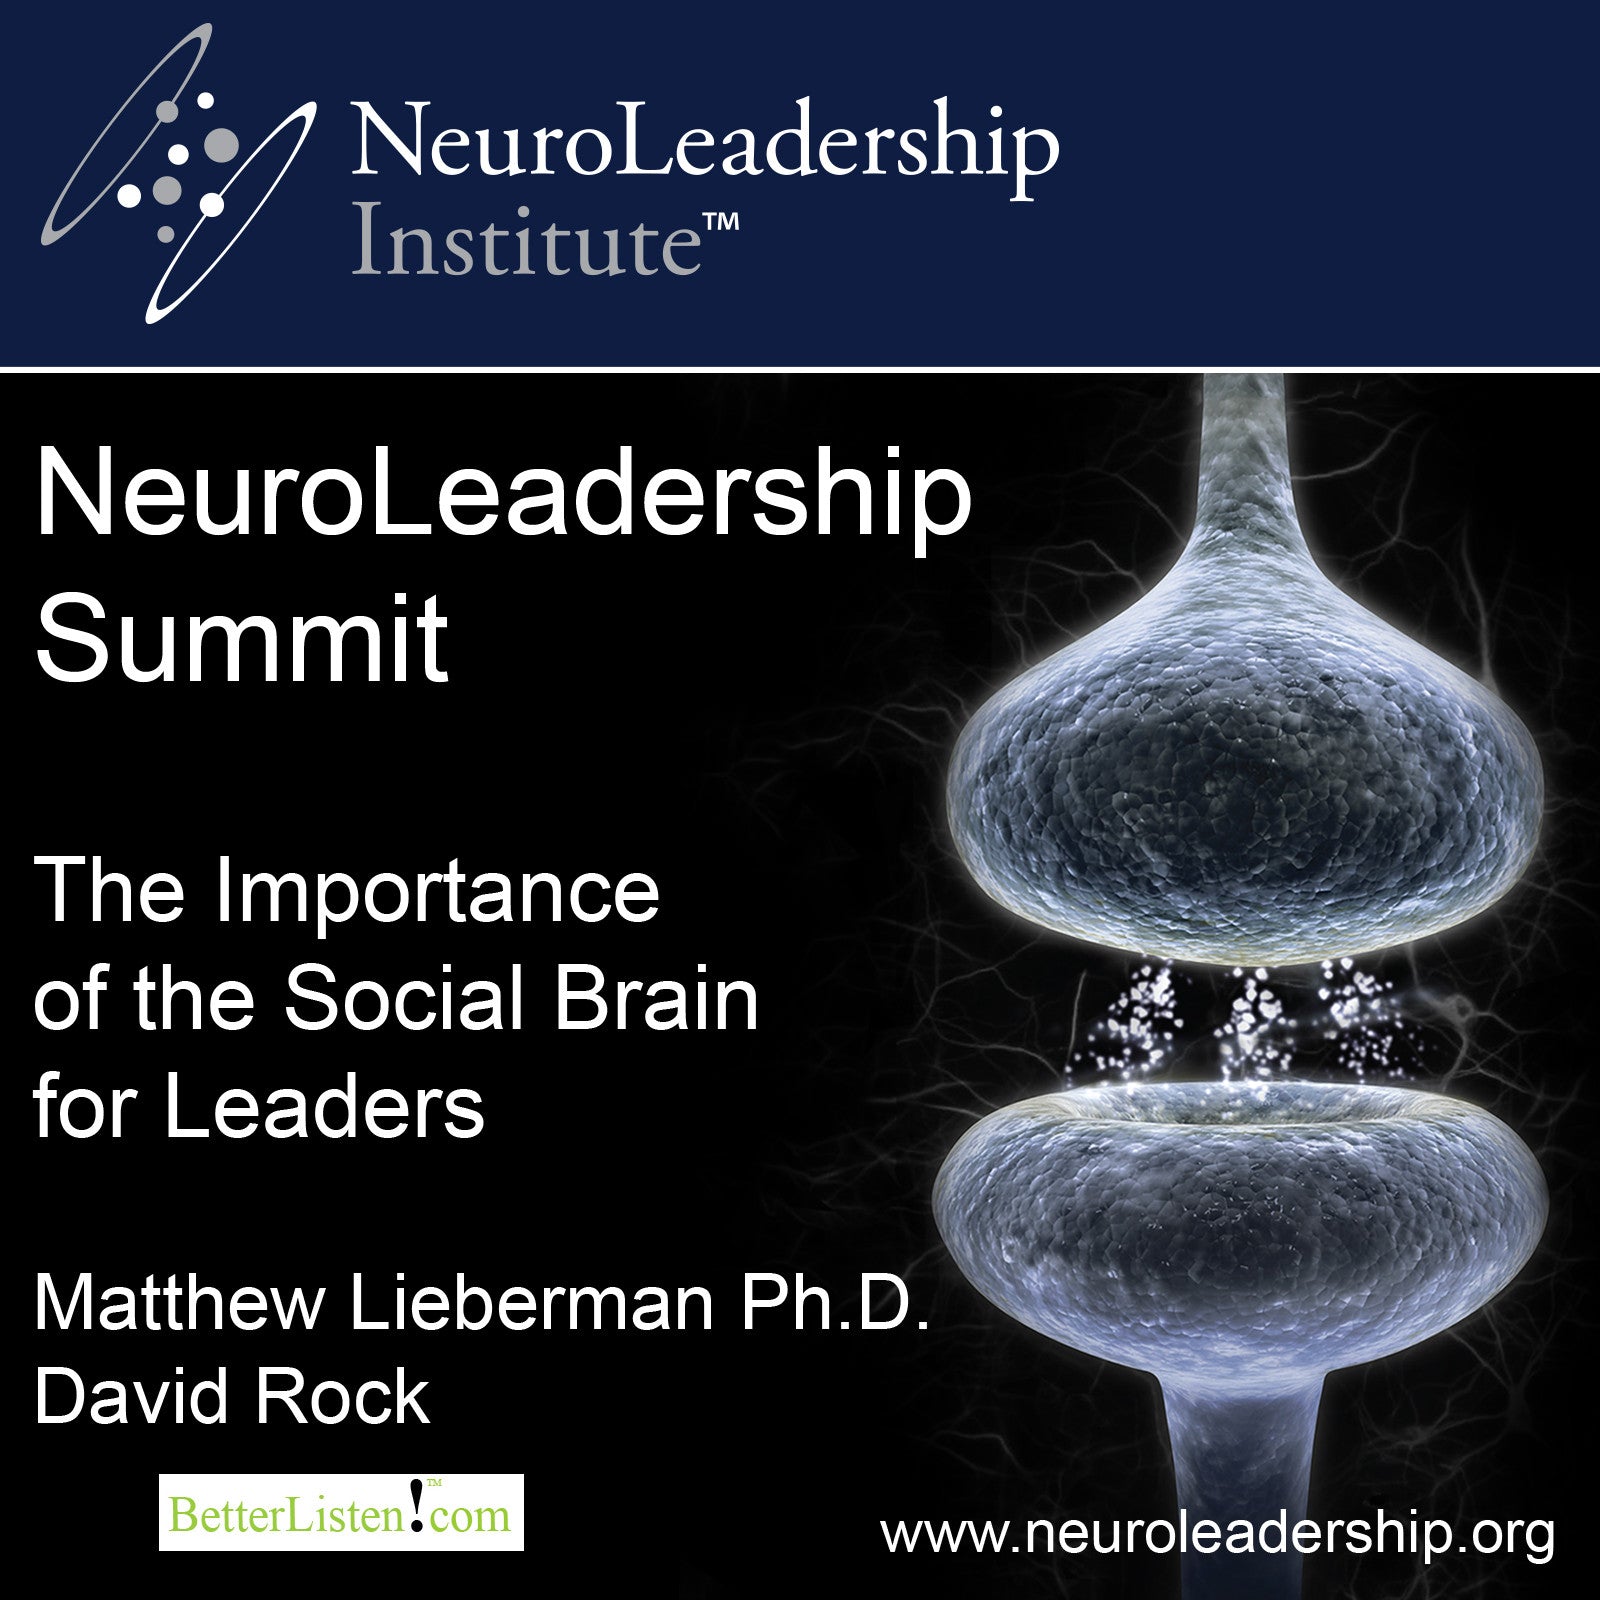 The Importance of the Social Brain for Leaders with Matthew Lieberman and David Rock - BetterListen!